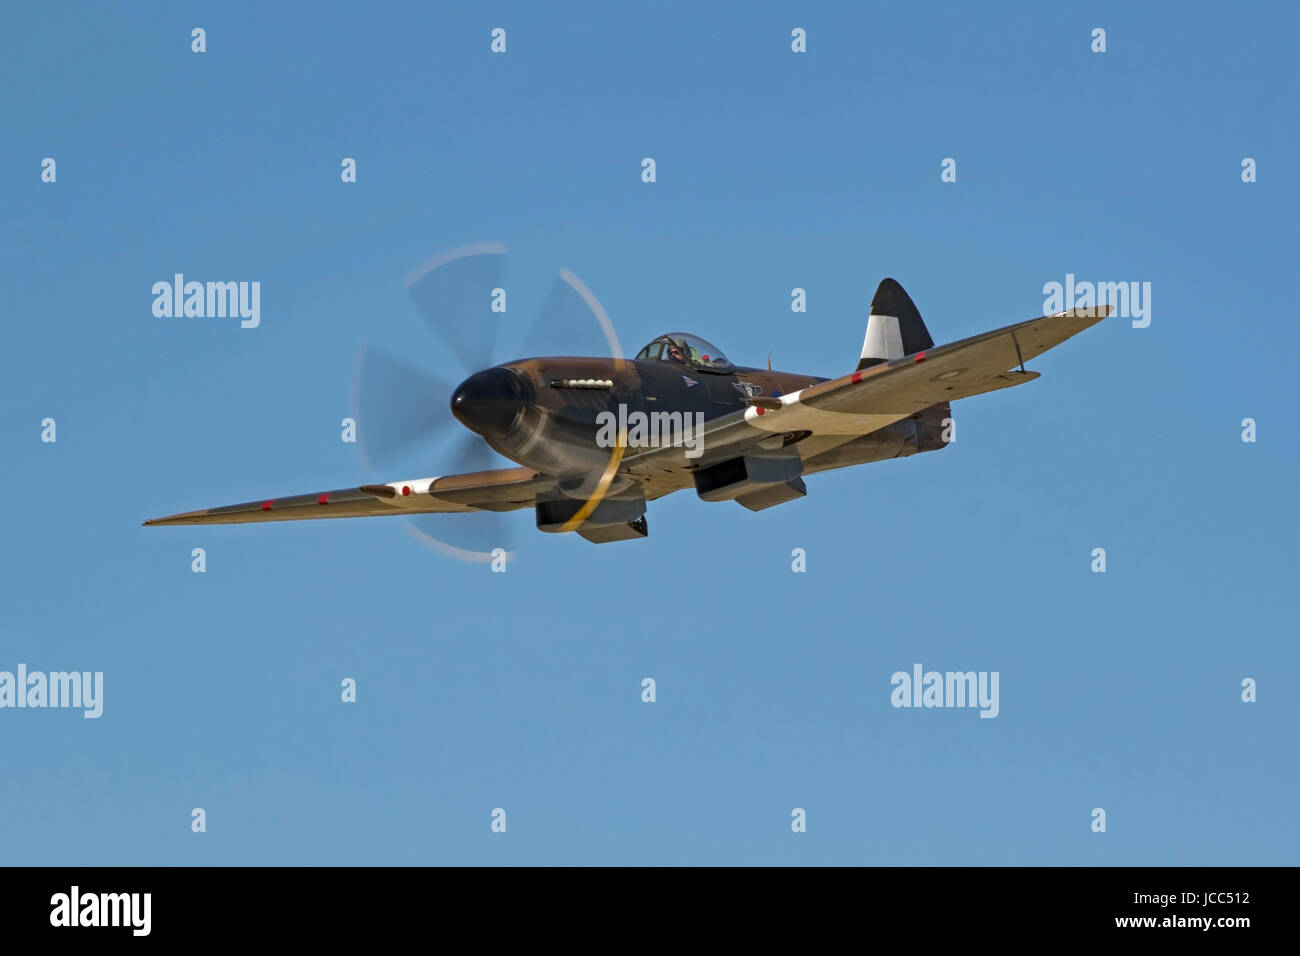 Airplane British WWII RAF Submarine Spitfire flying at air show in California Stock Photo